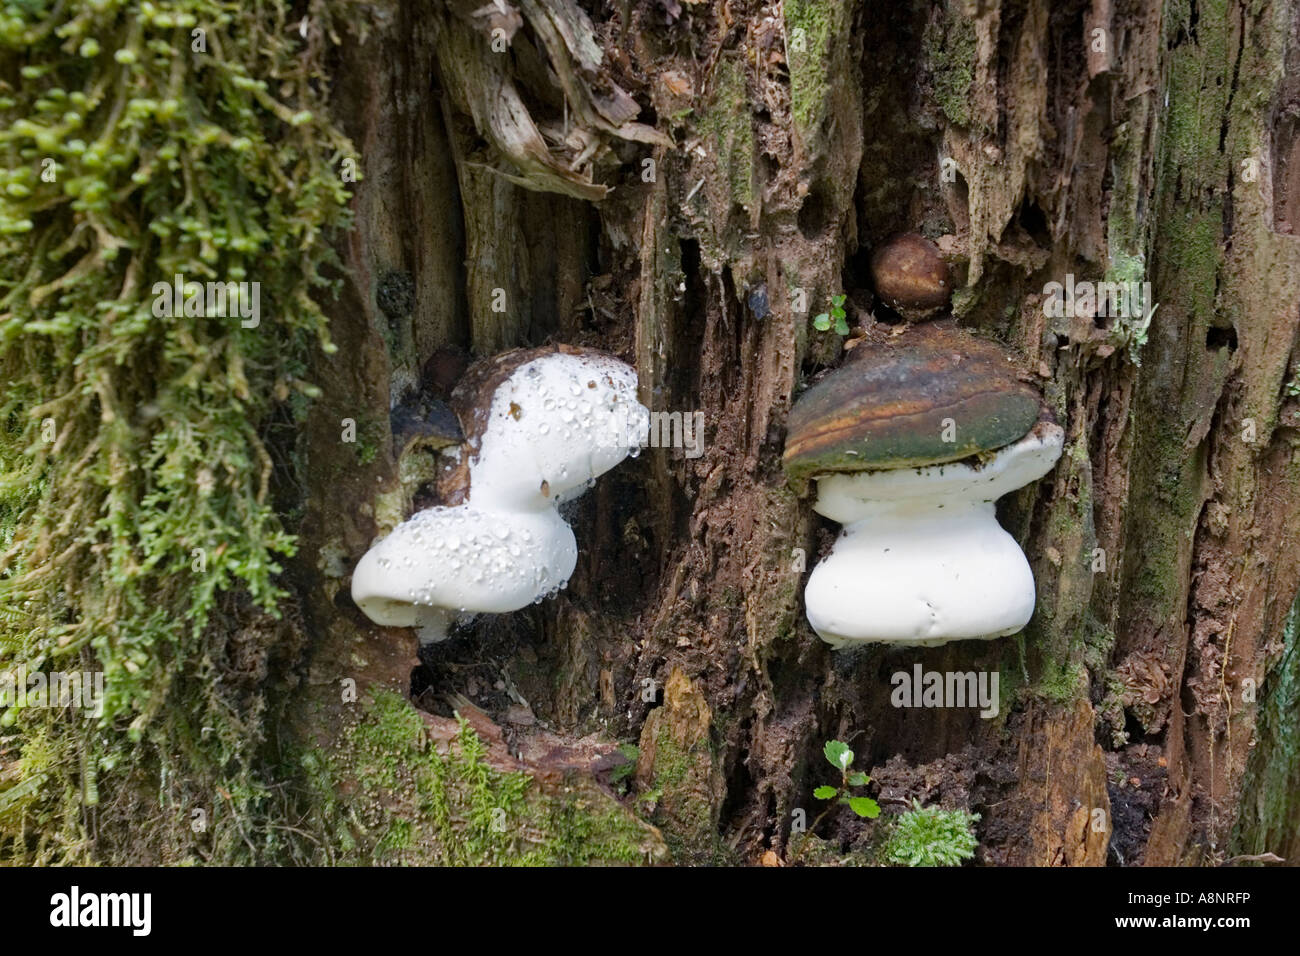 Bracket fungi growing in beech forest Blue Pools near Haast South Island New Zealand Stock Photo